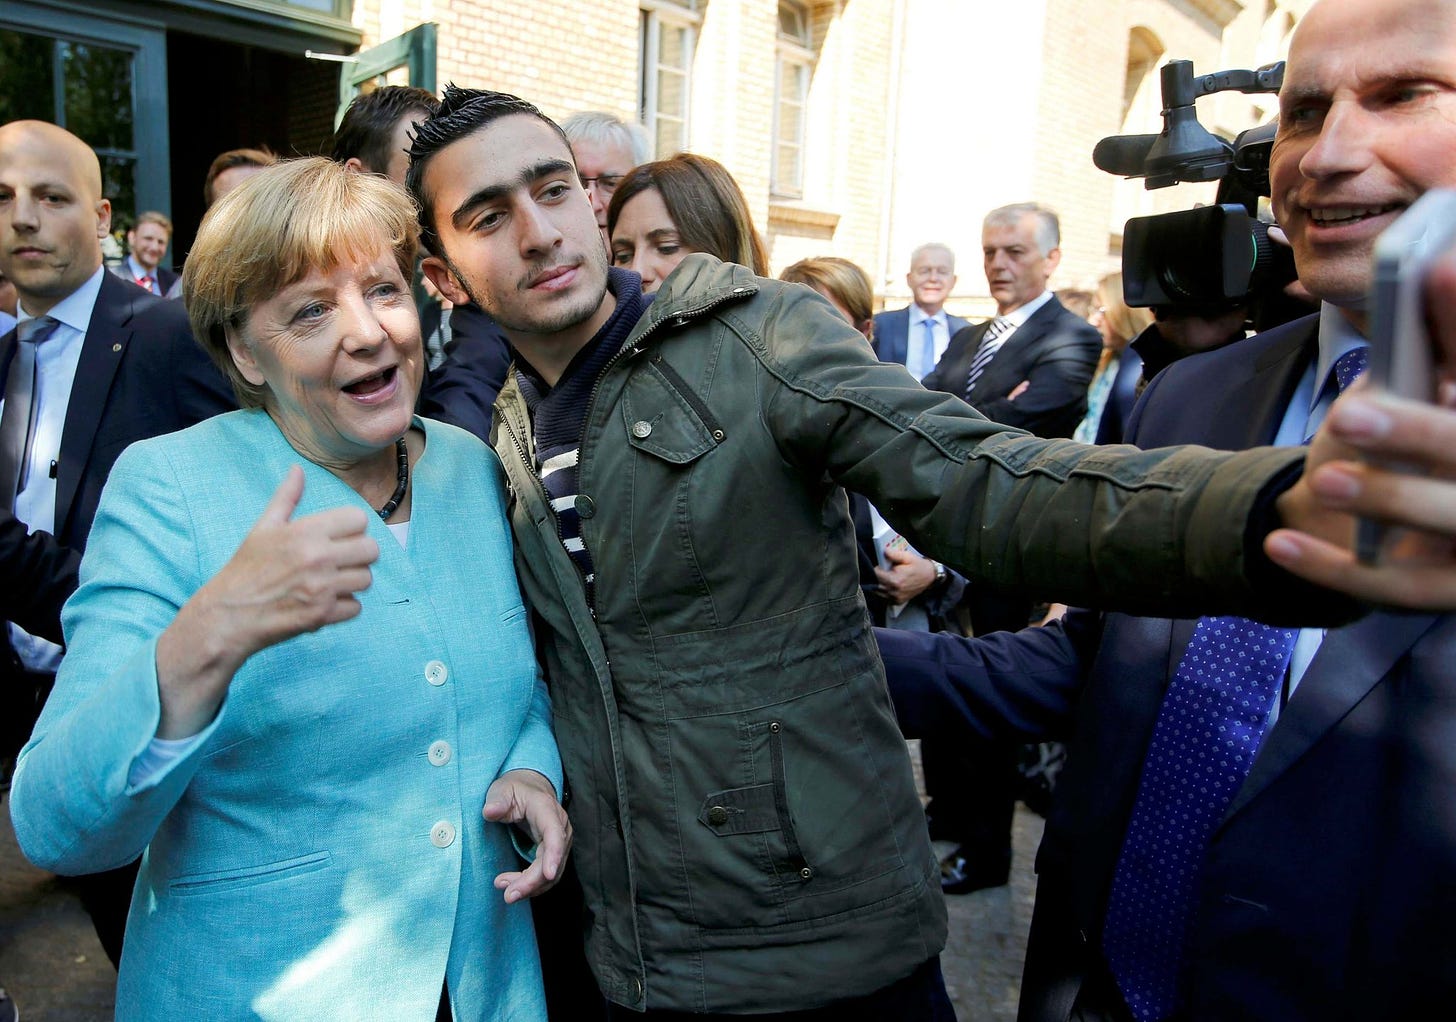 Angela Merkel, who invited the third world into Europe in 2015, poses with a migrant